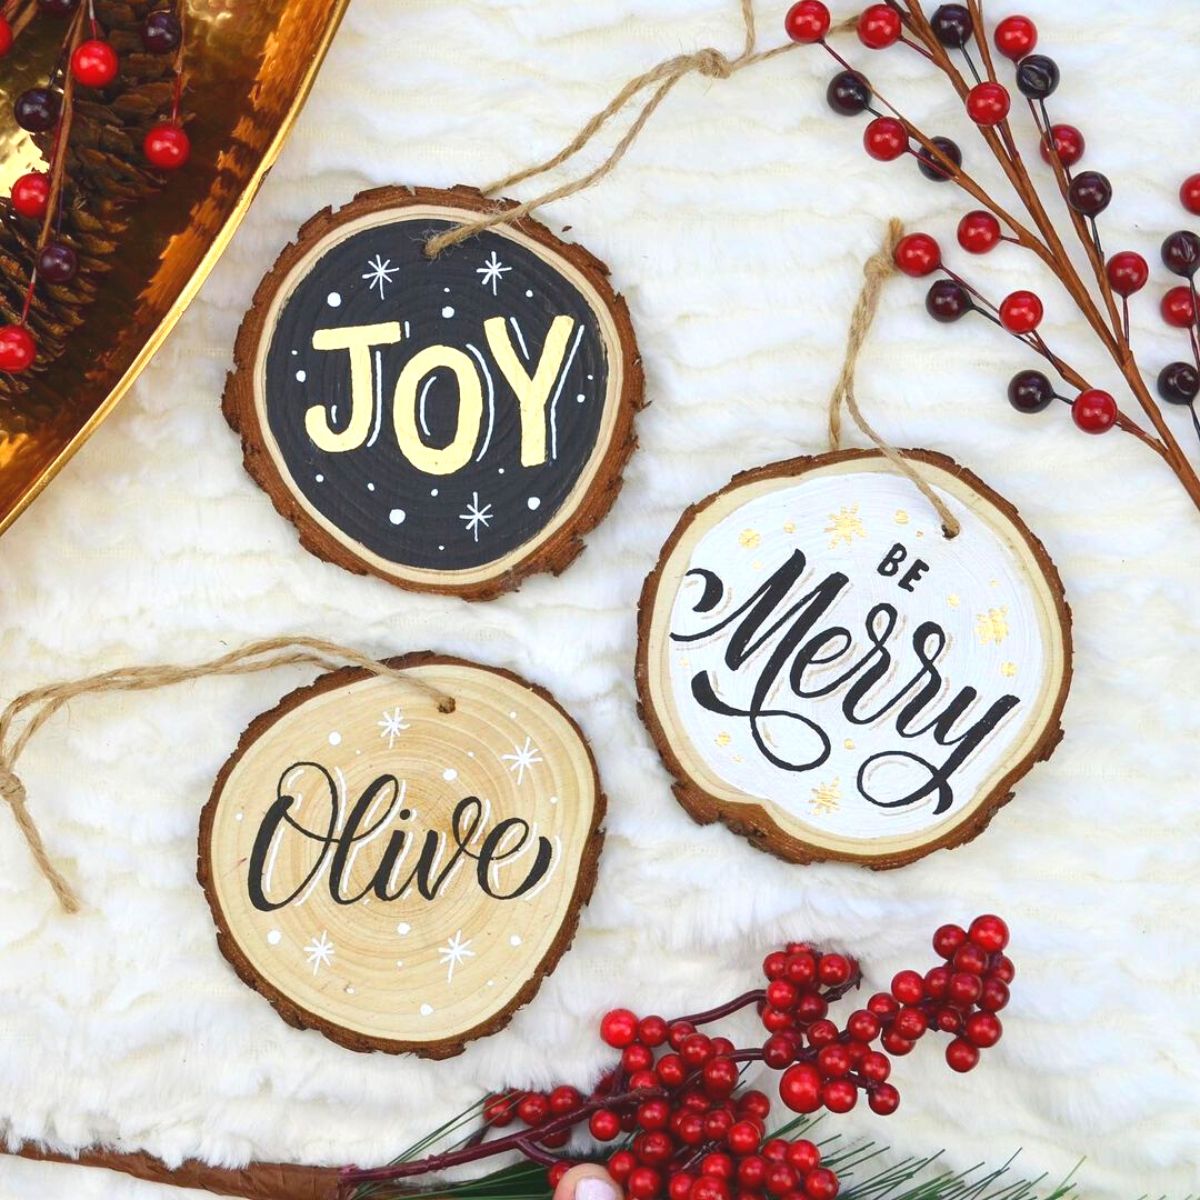 Personalized Christmas ornament trend